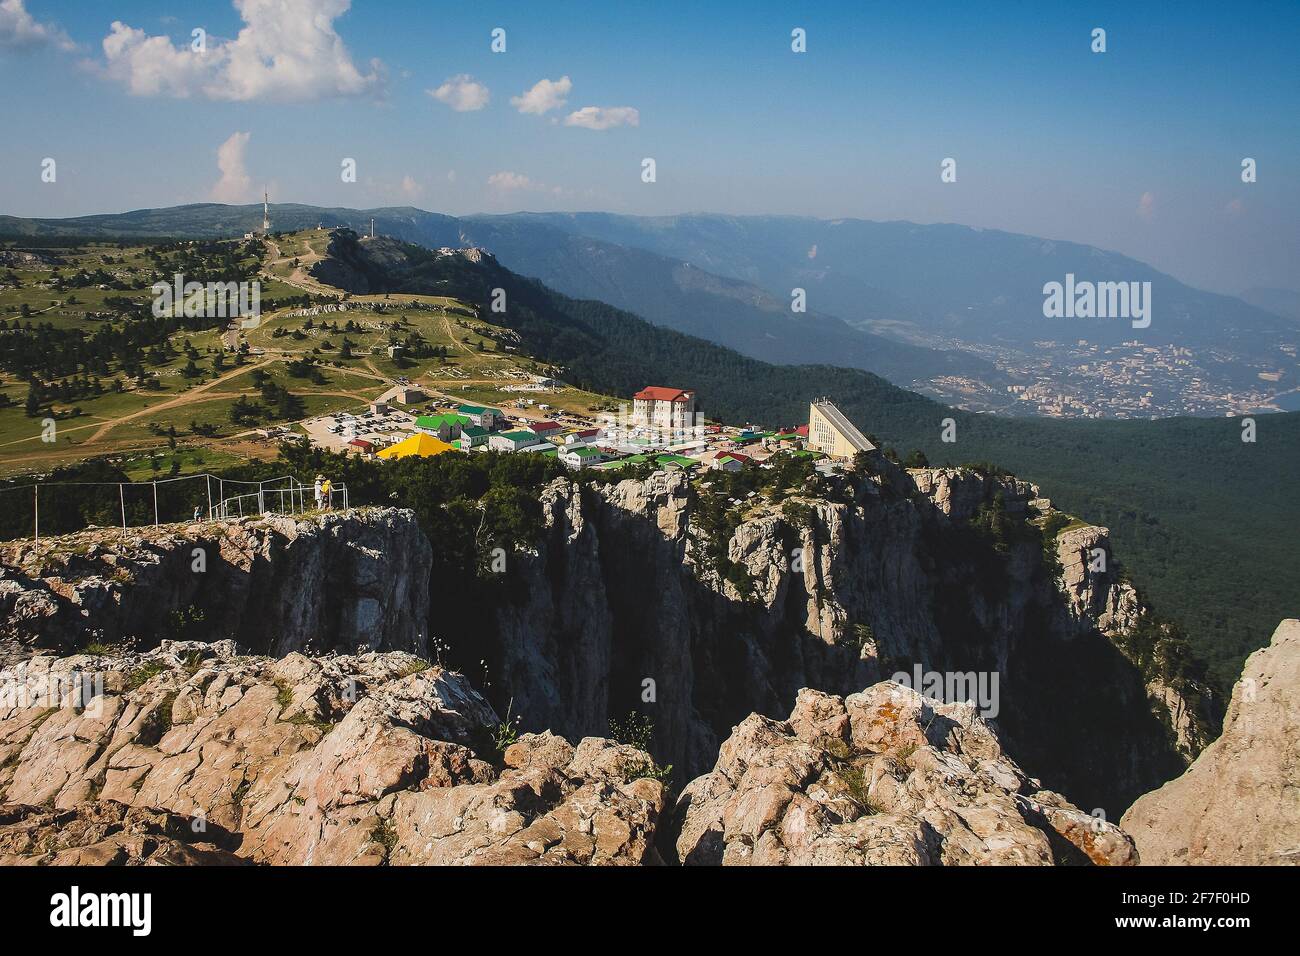 Ay petri mountain on Crimean peninsula wit visible top station of gondola or cable car. City of Yalta in the background. Stock Photo